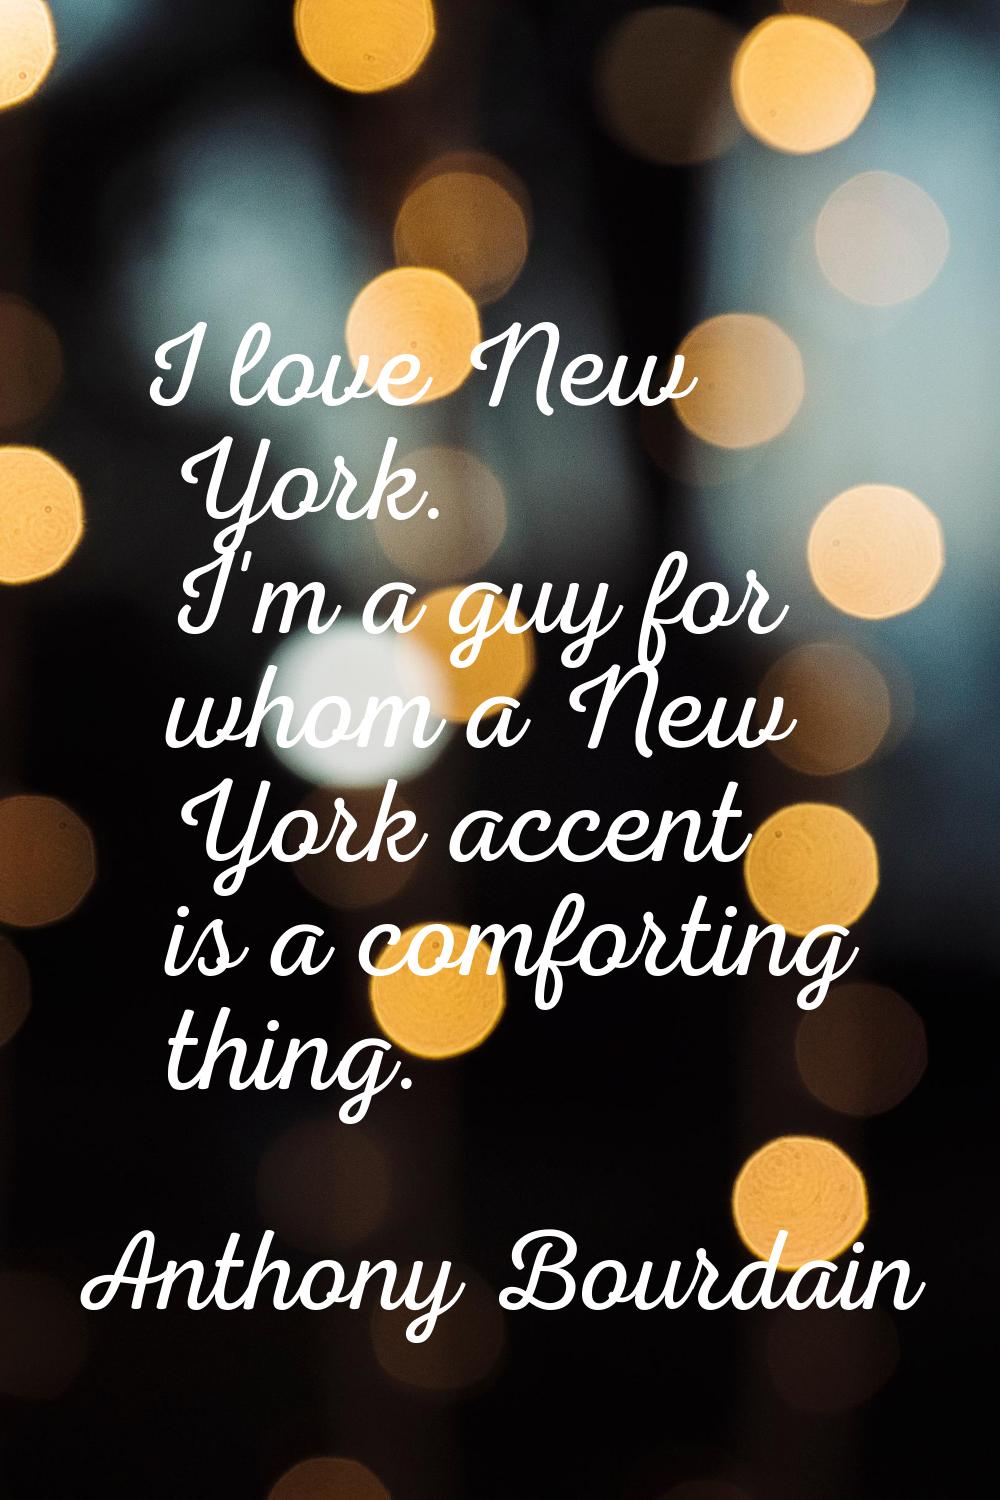 I love New York. I'm a guy for whom a New York accent is a comforting thing.